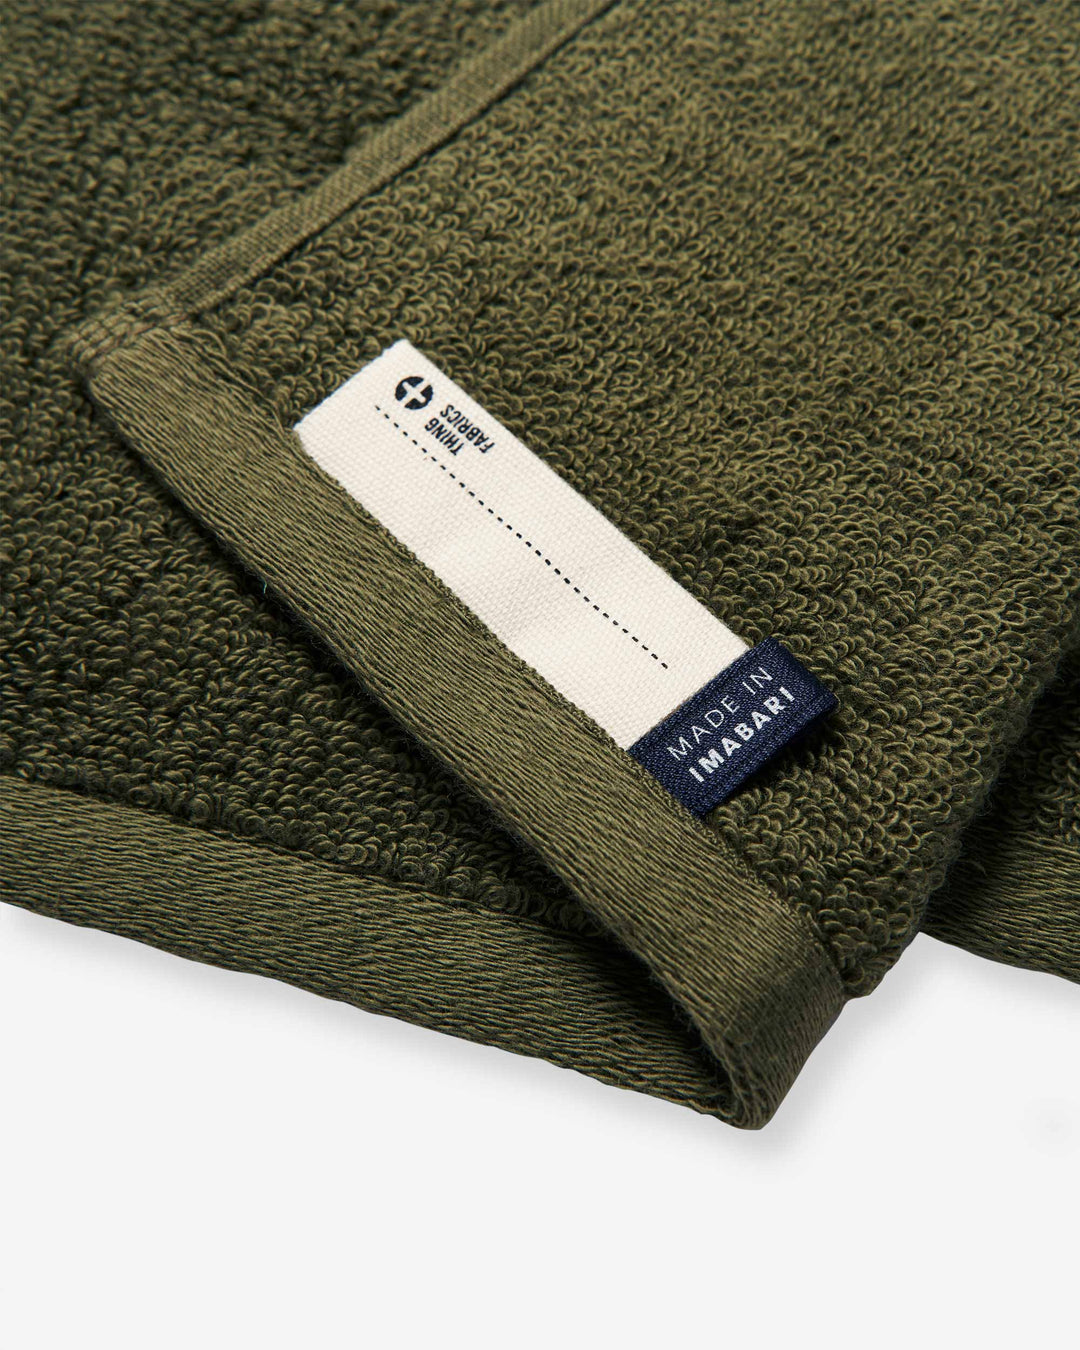 TIP TOP 365 Towel Gift Box - Olive Green